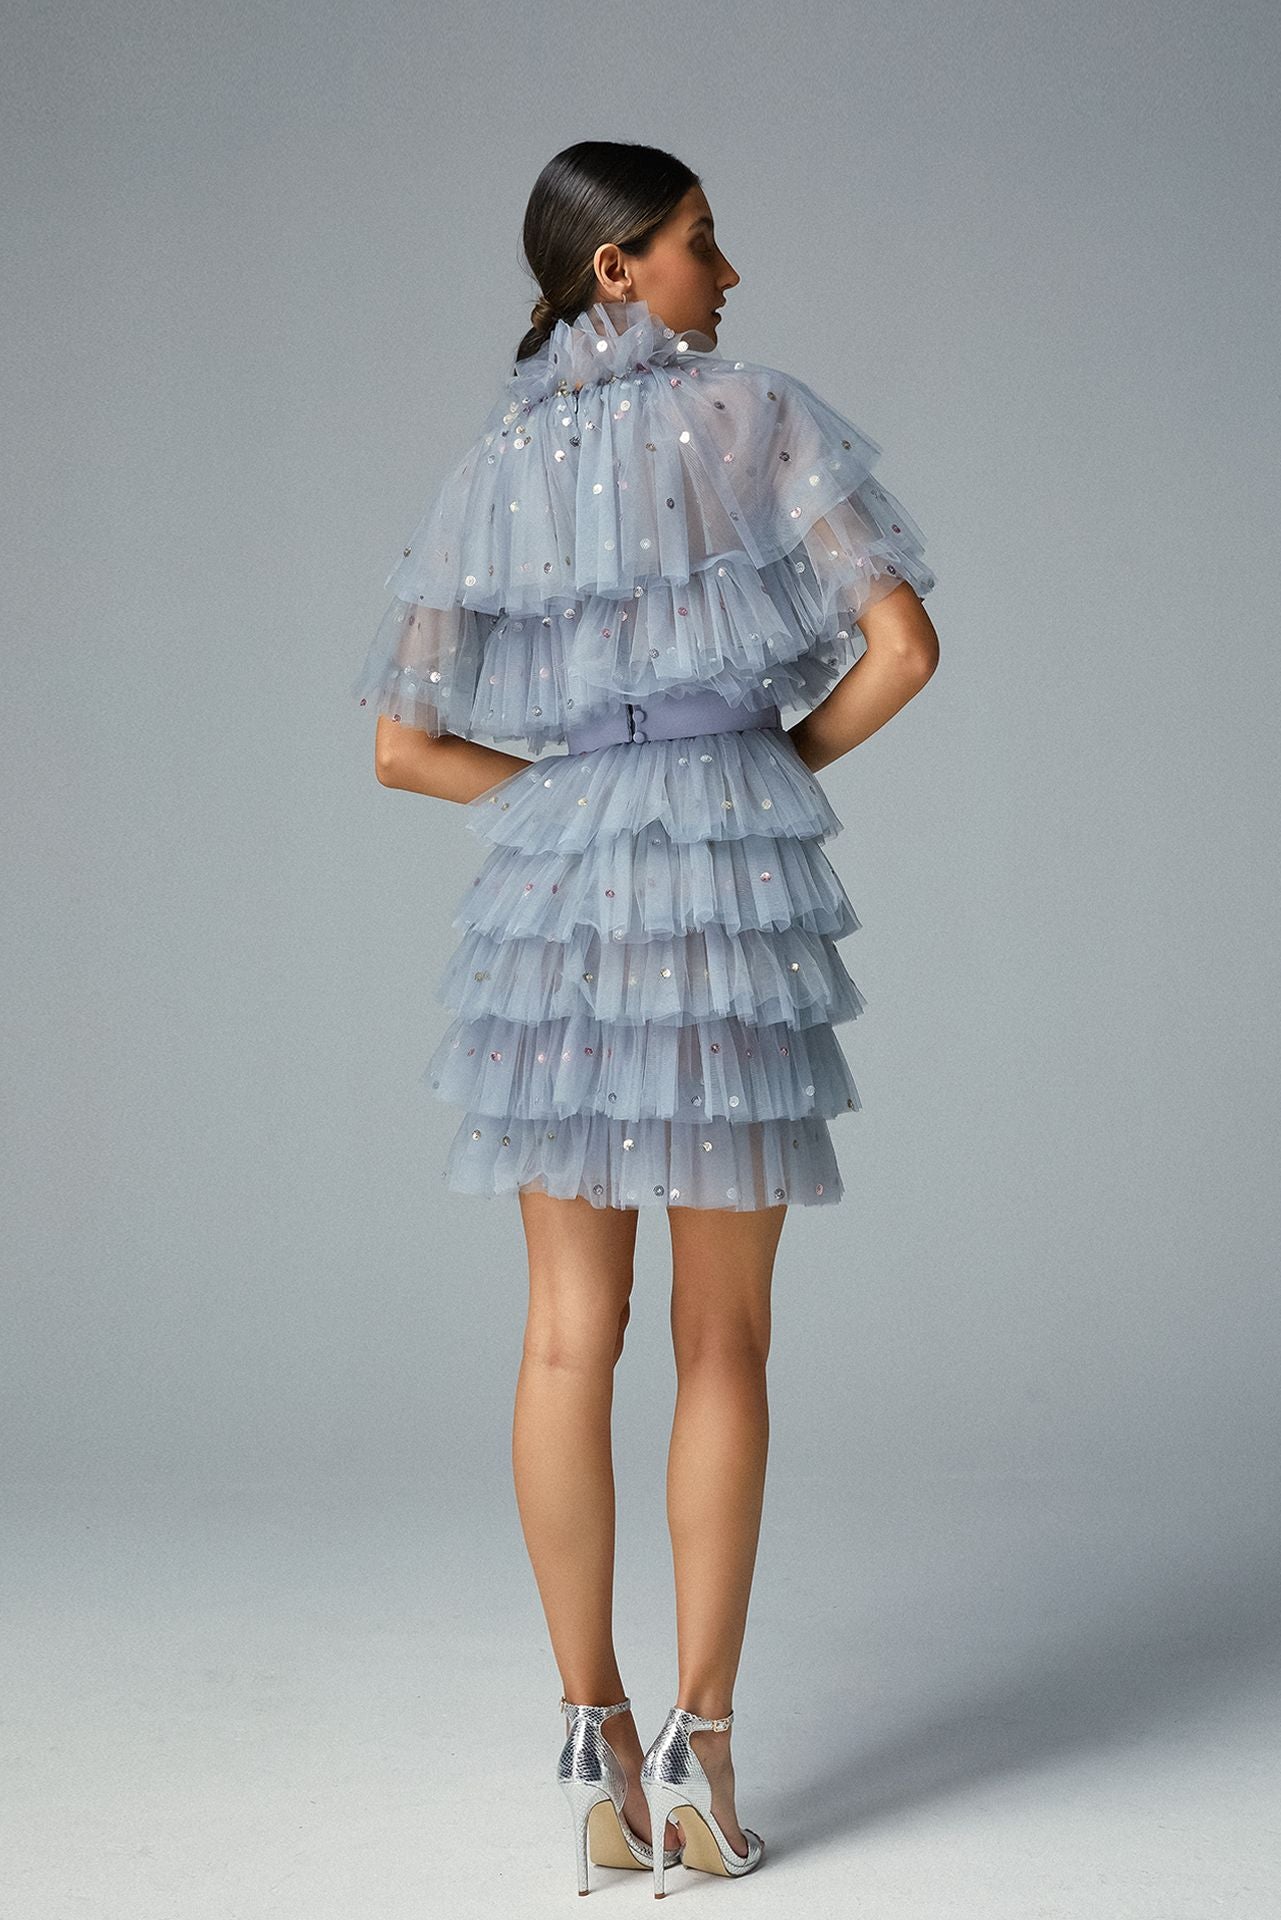 Sequined Silver Dots, a Multi Layered Ruffled Powder Blue Tulle